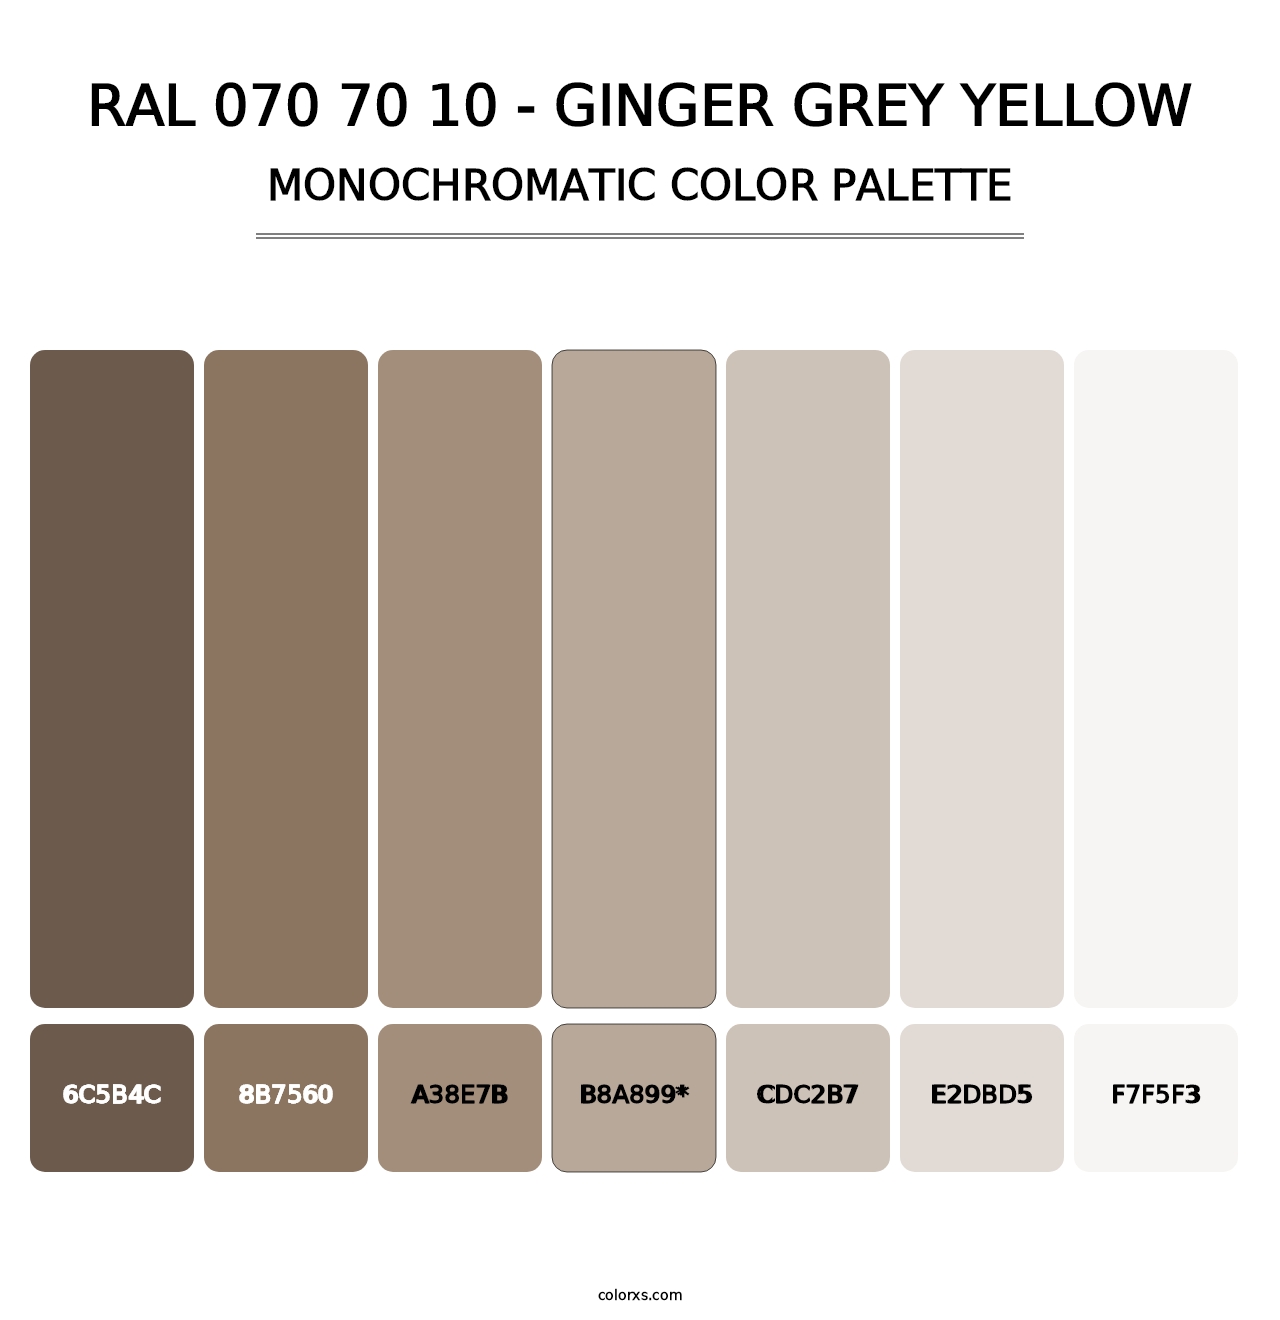 RAL 070 70 10 - Ginger Grey Yellow - Monochromatic Color Palette